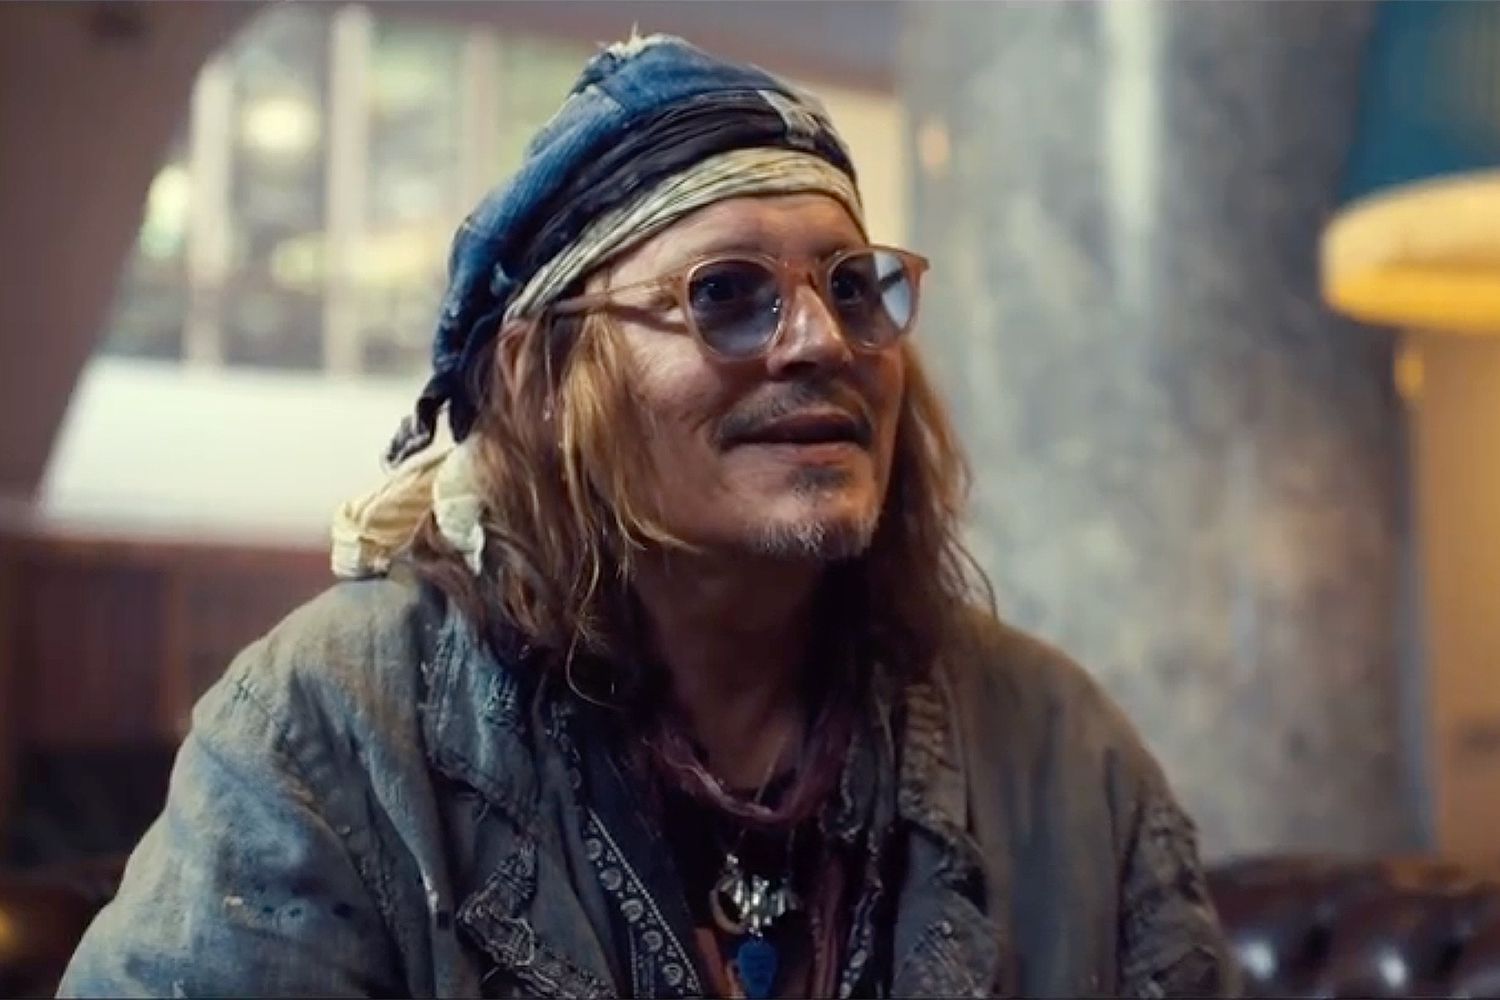 Johnny Depp Dons 'Pirates of the Caribbean' Role Again!